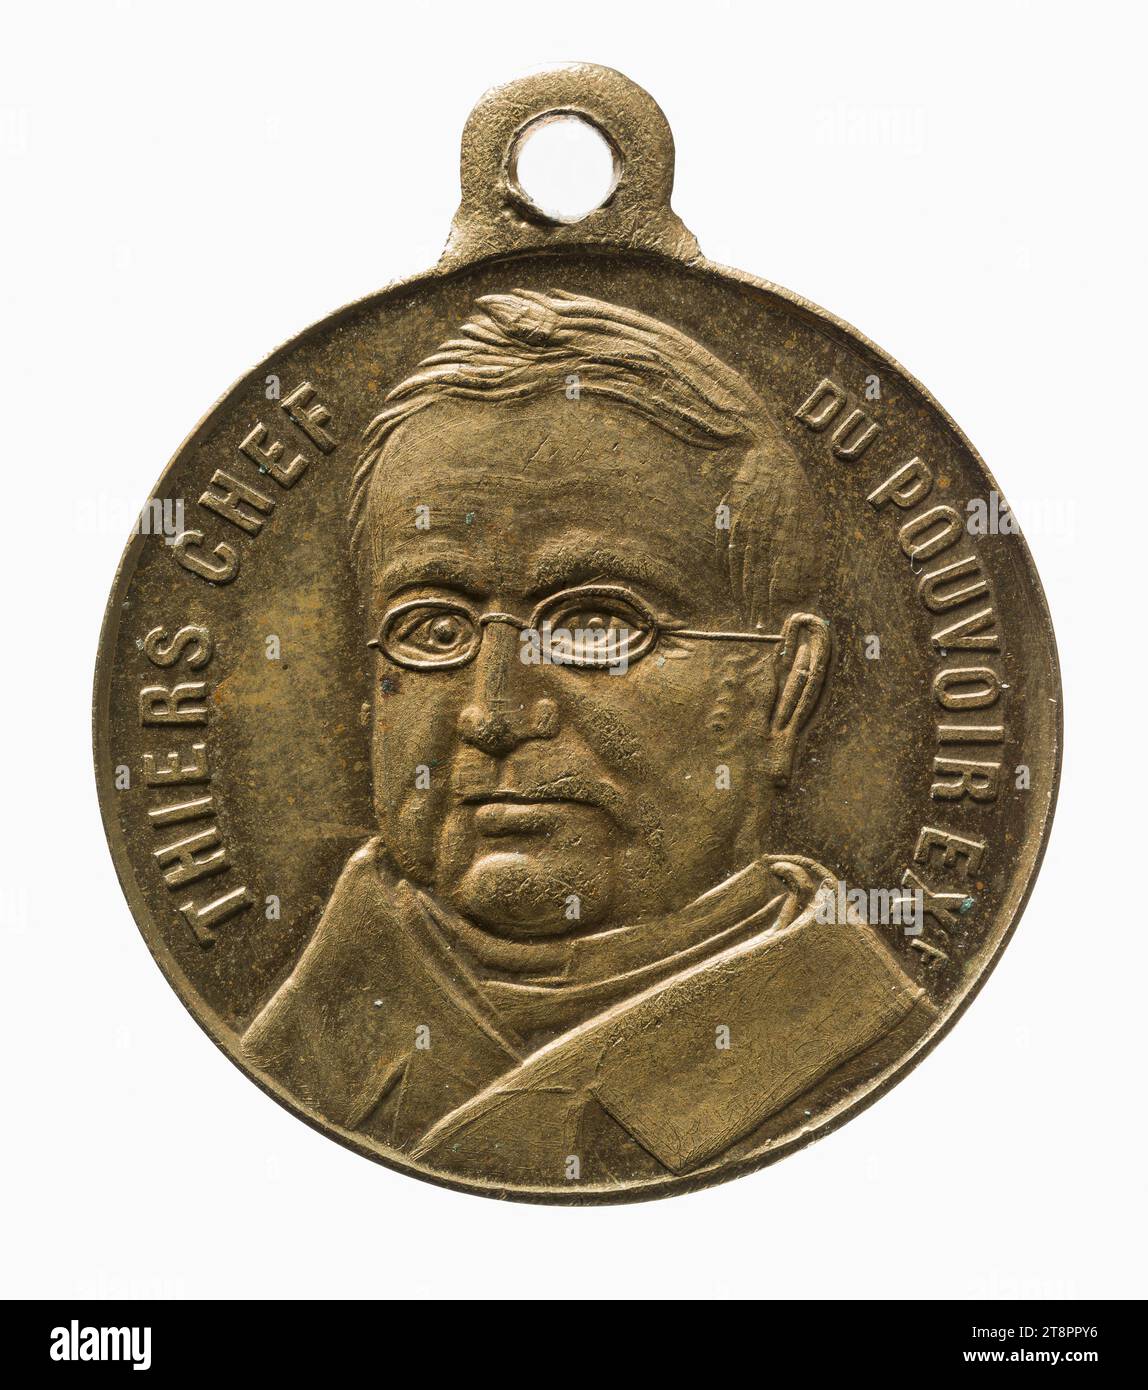 Adolphe Thiers, head of the executive power (1797-1877) and Otto von Bismark, Prussian then German chancellor (1815-1898),1870-1871, Anonymous, Medal engraver, Between 1870 and 1871, 19th century, Numismatic, Medal, Brass, Sizes - Work: Diameter: 2.4 cm, Weight (type size): 6.22 g Stock Photo